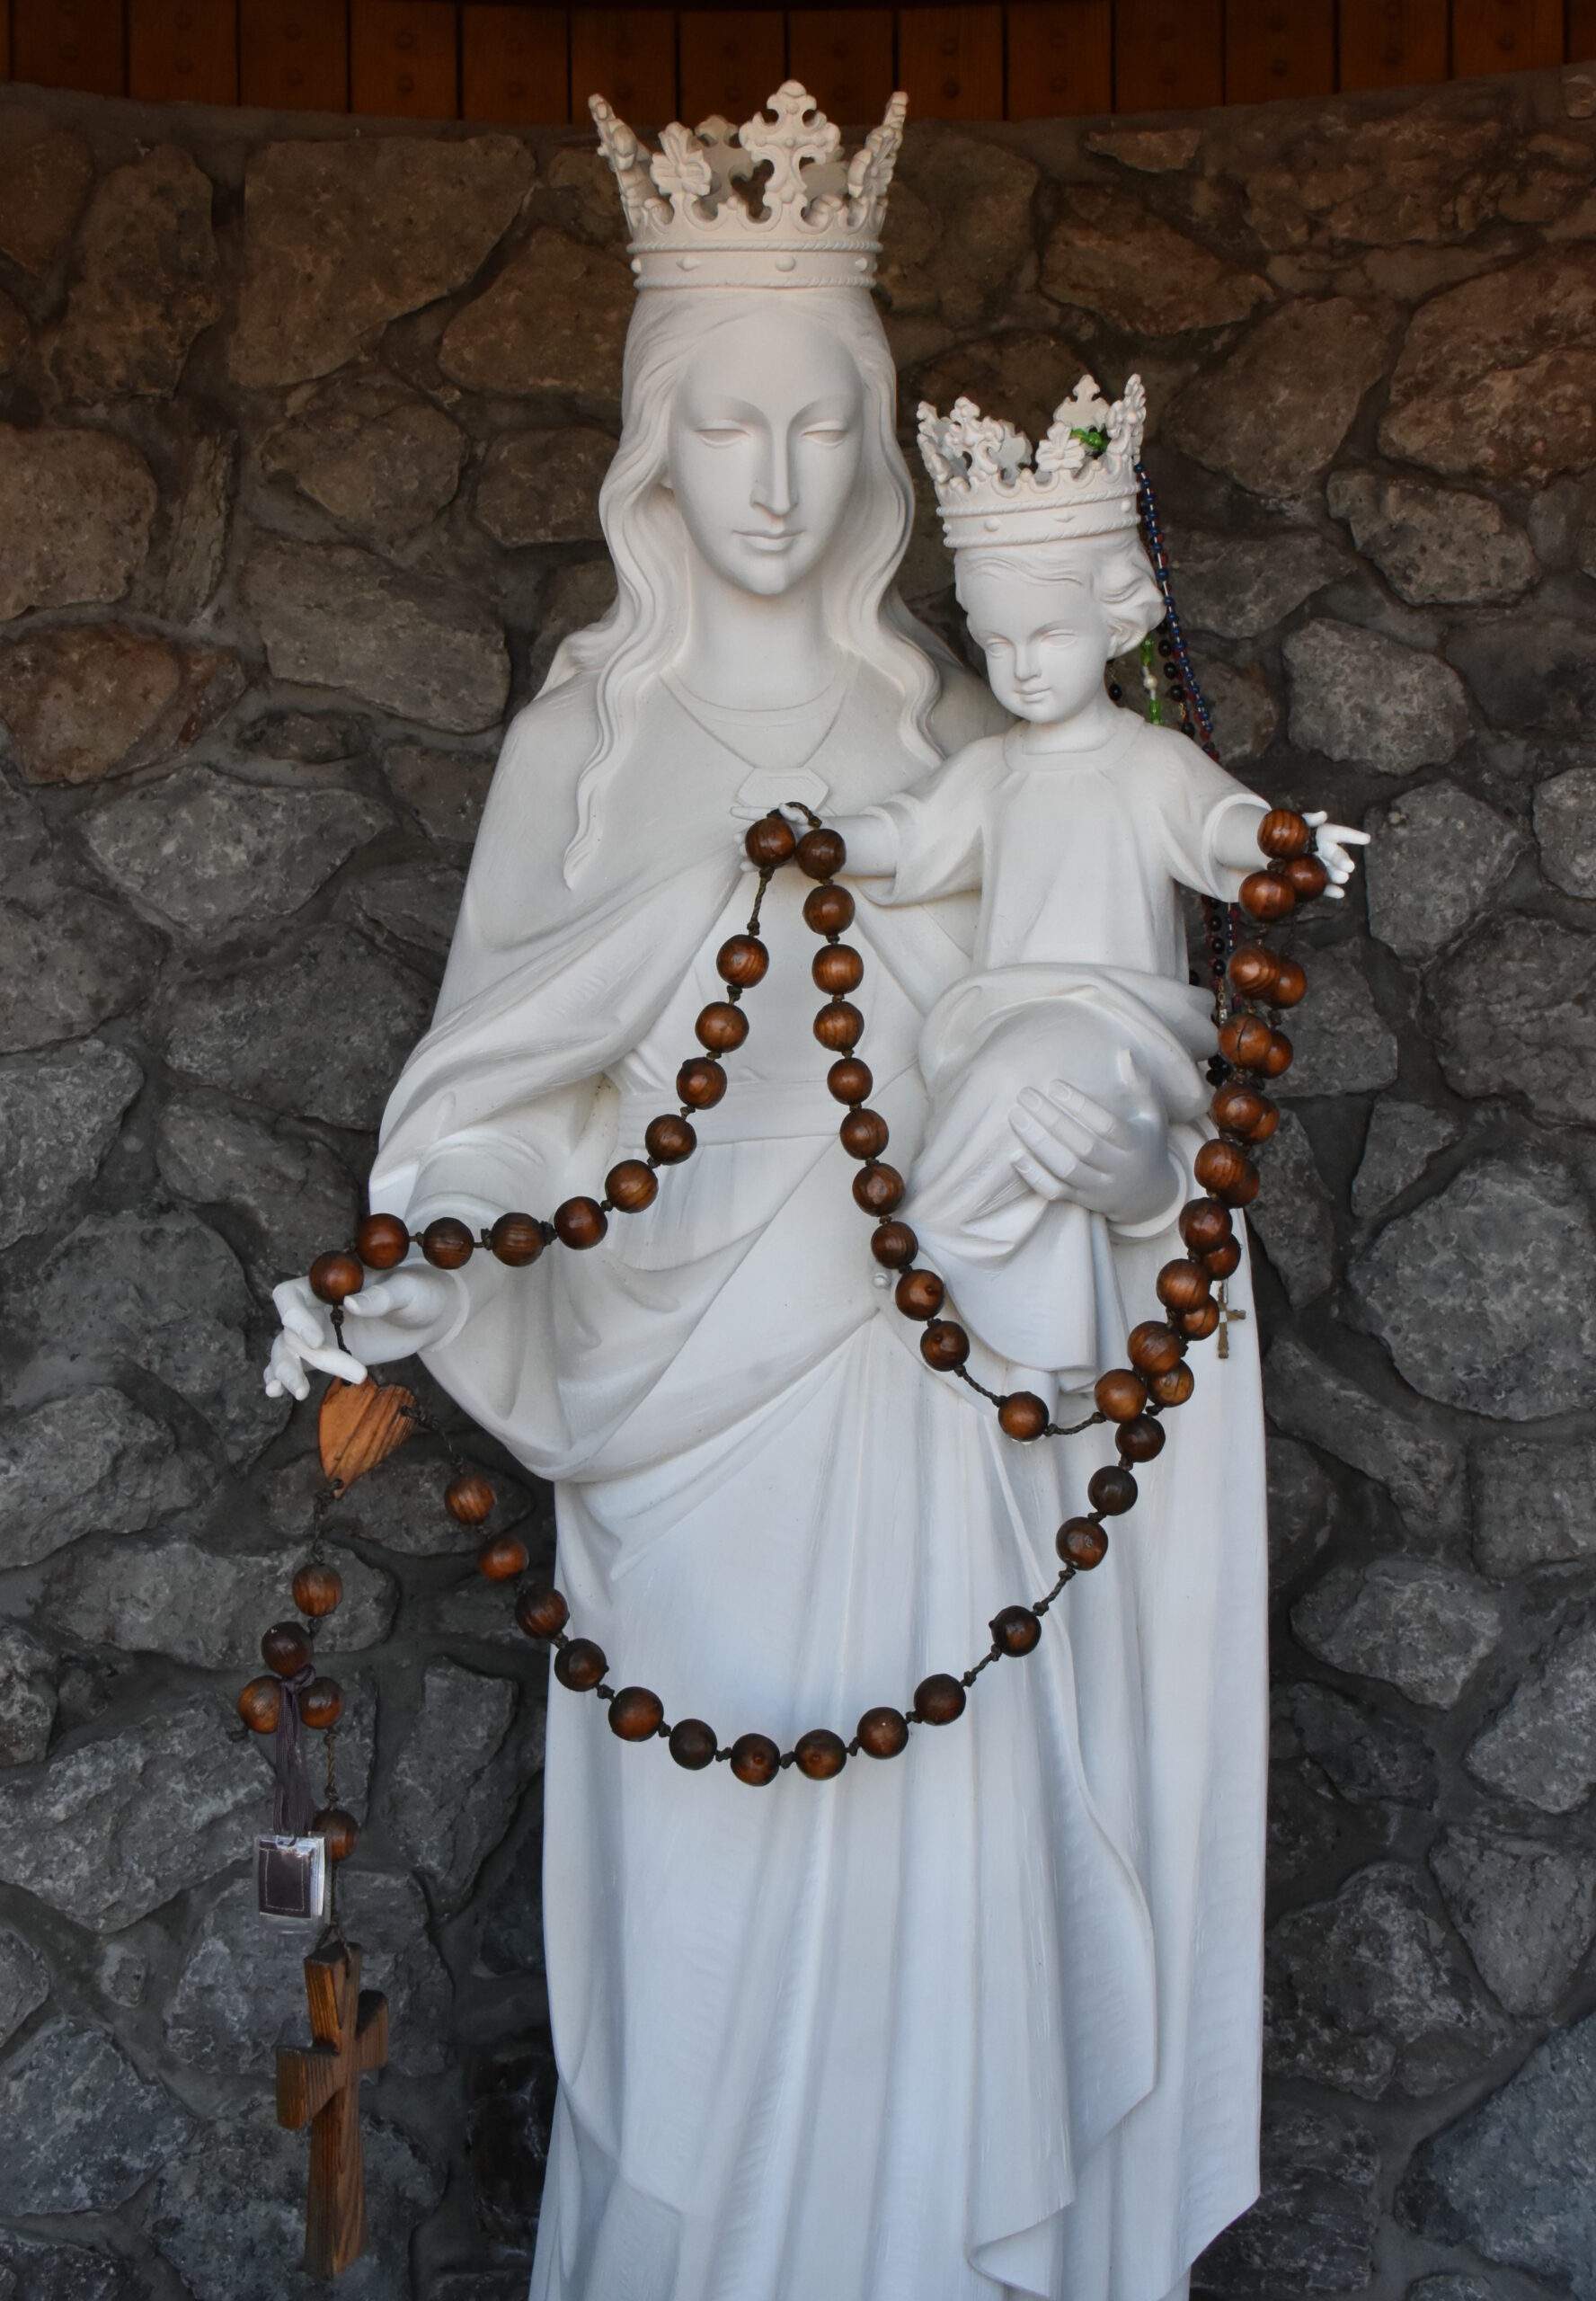 Statue of the Blessed Mother, holding baby Jesus and rosary beads at Holy Rosary Parish in Lowellville